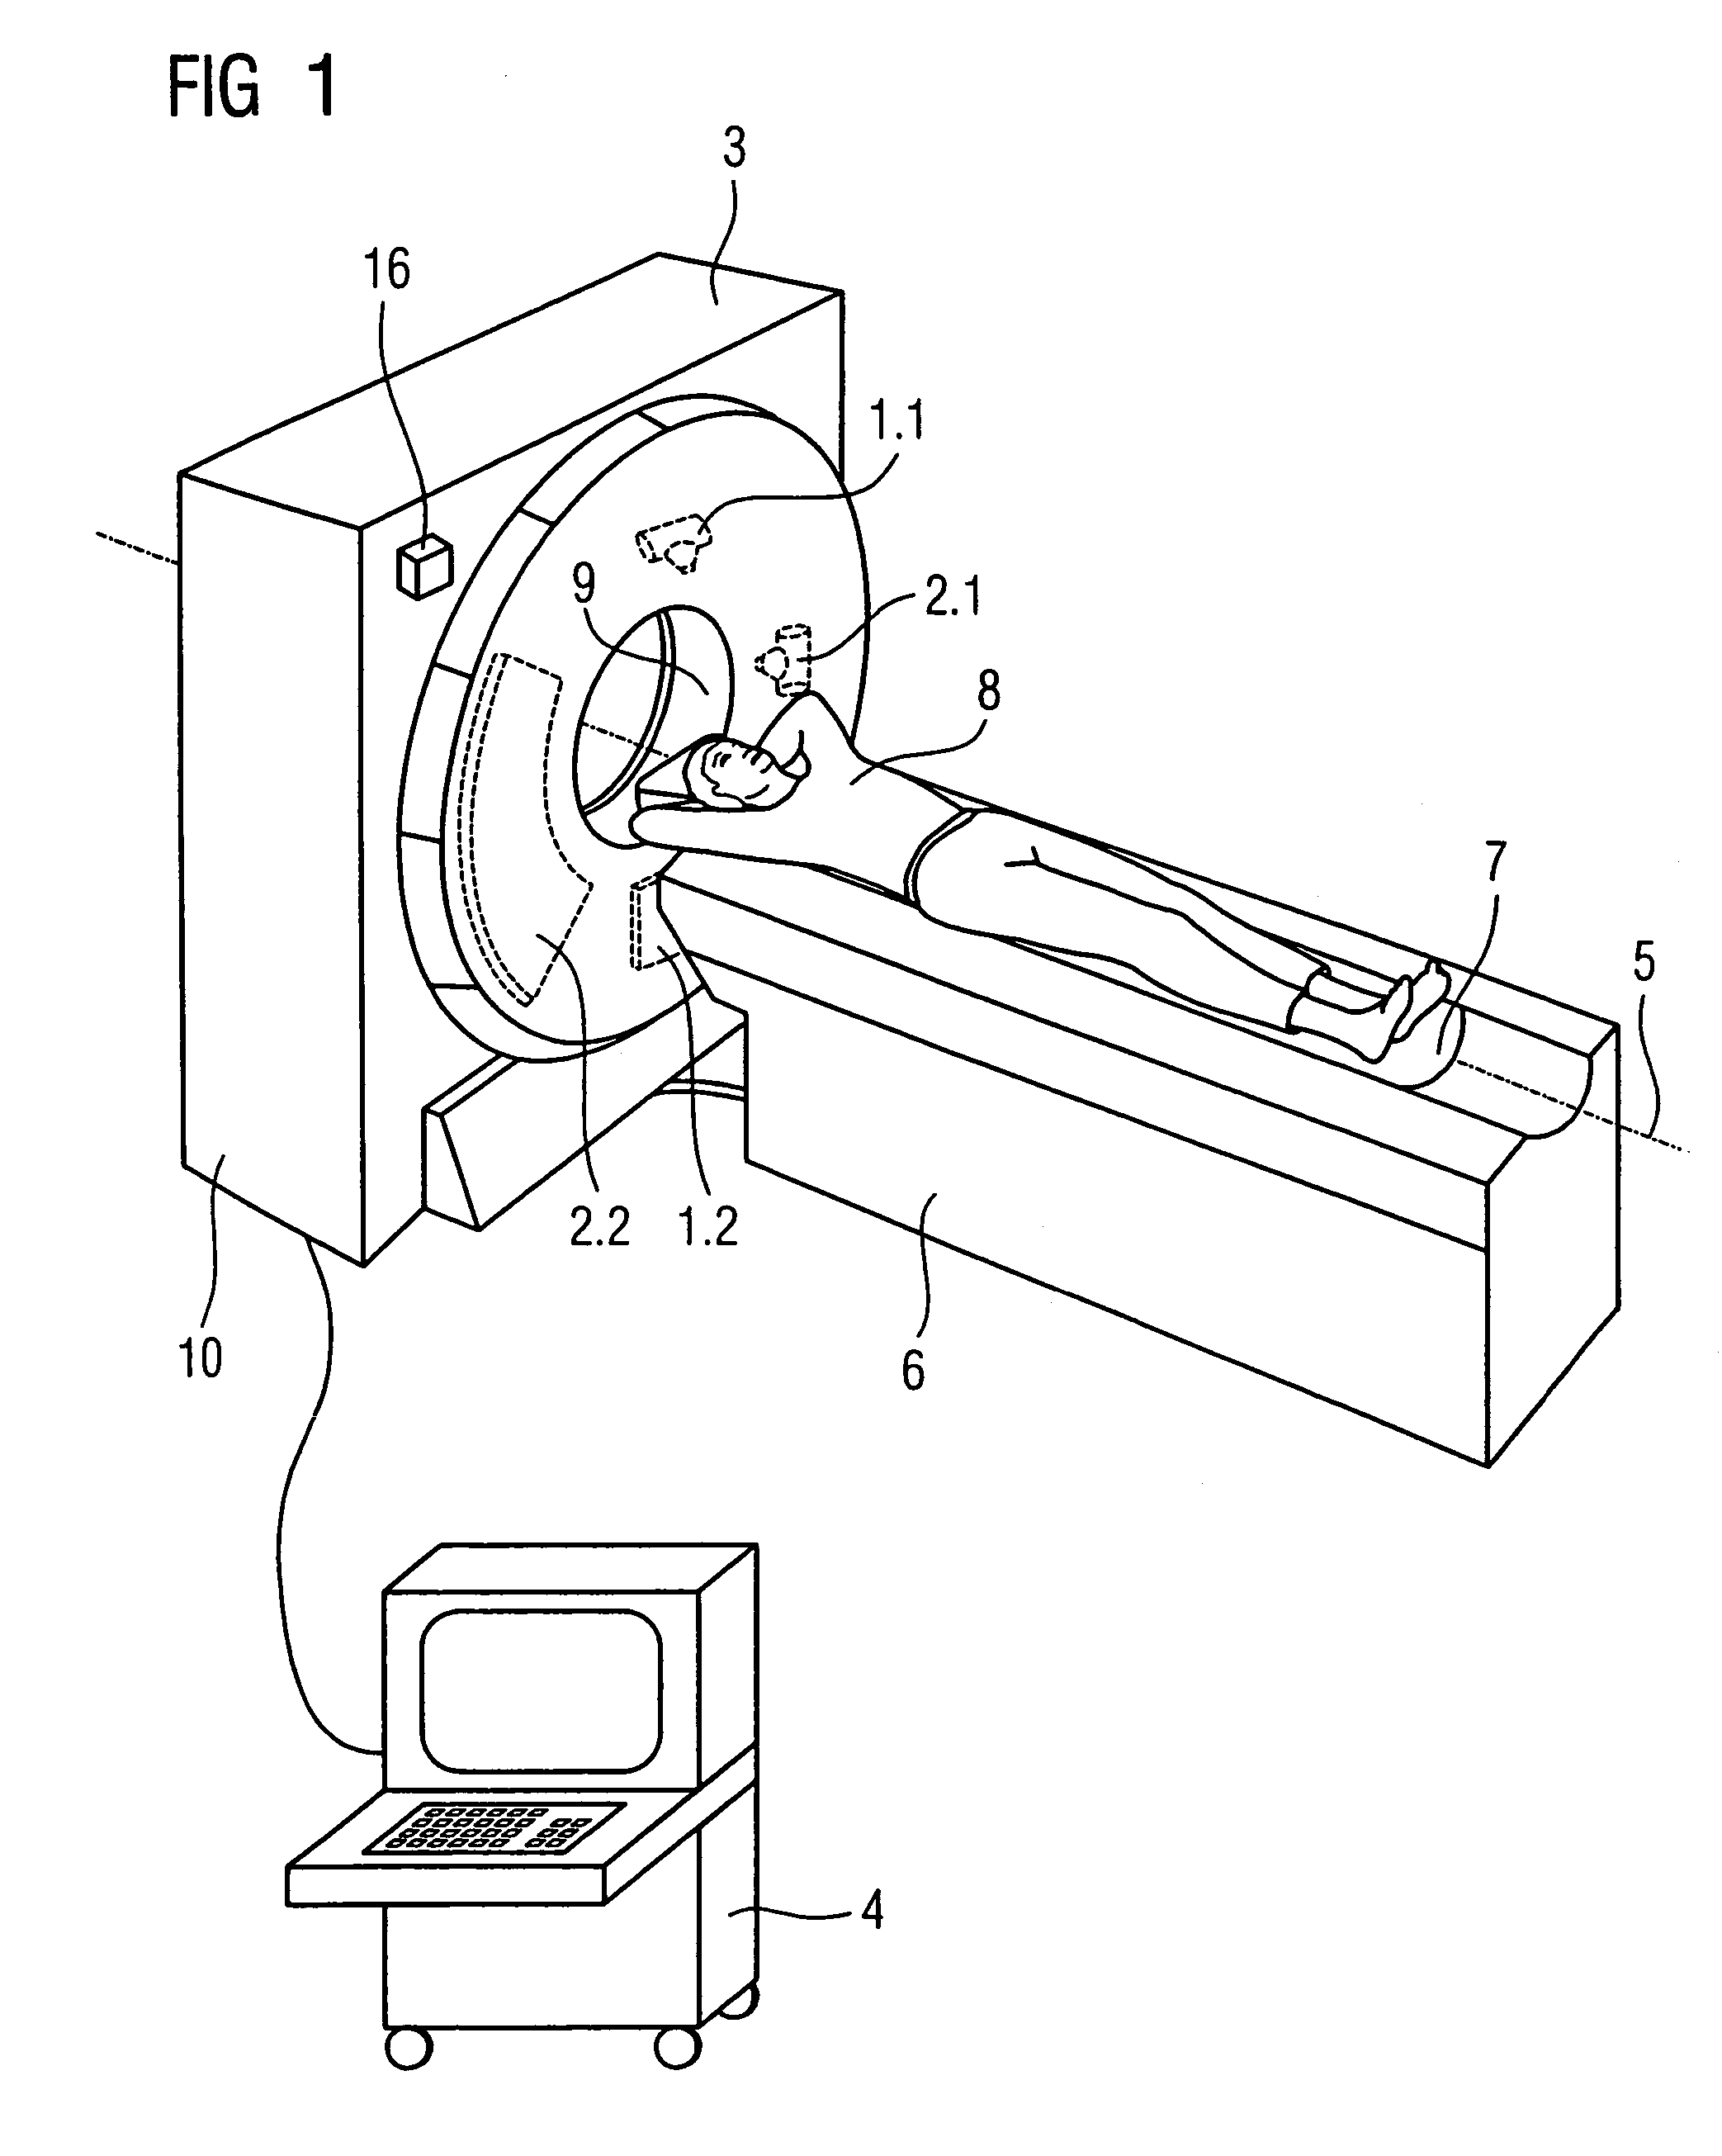 Imaging tomography apparatus with two acquisition systems, and method for determining their system angles